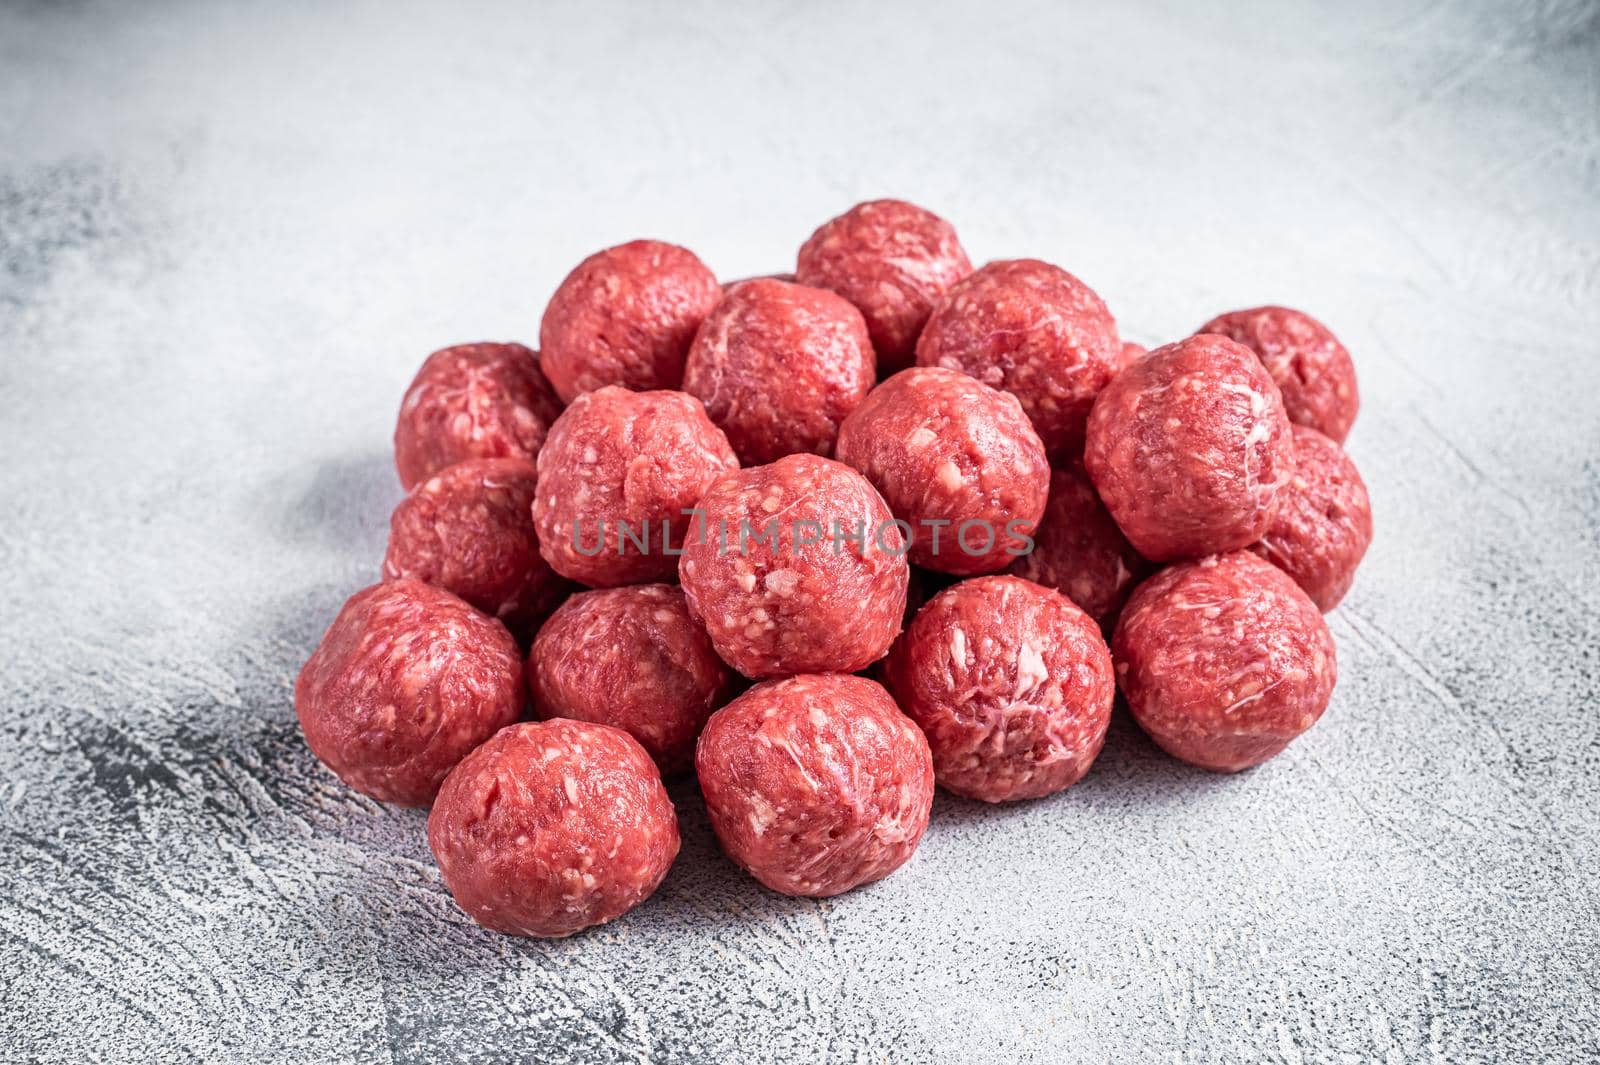 Raw beef and pork meatballs with spices on kitchen table. White background. Top view.